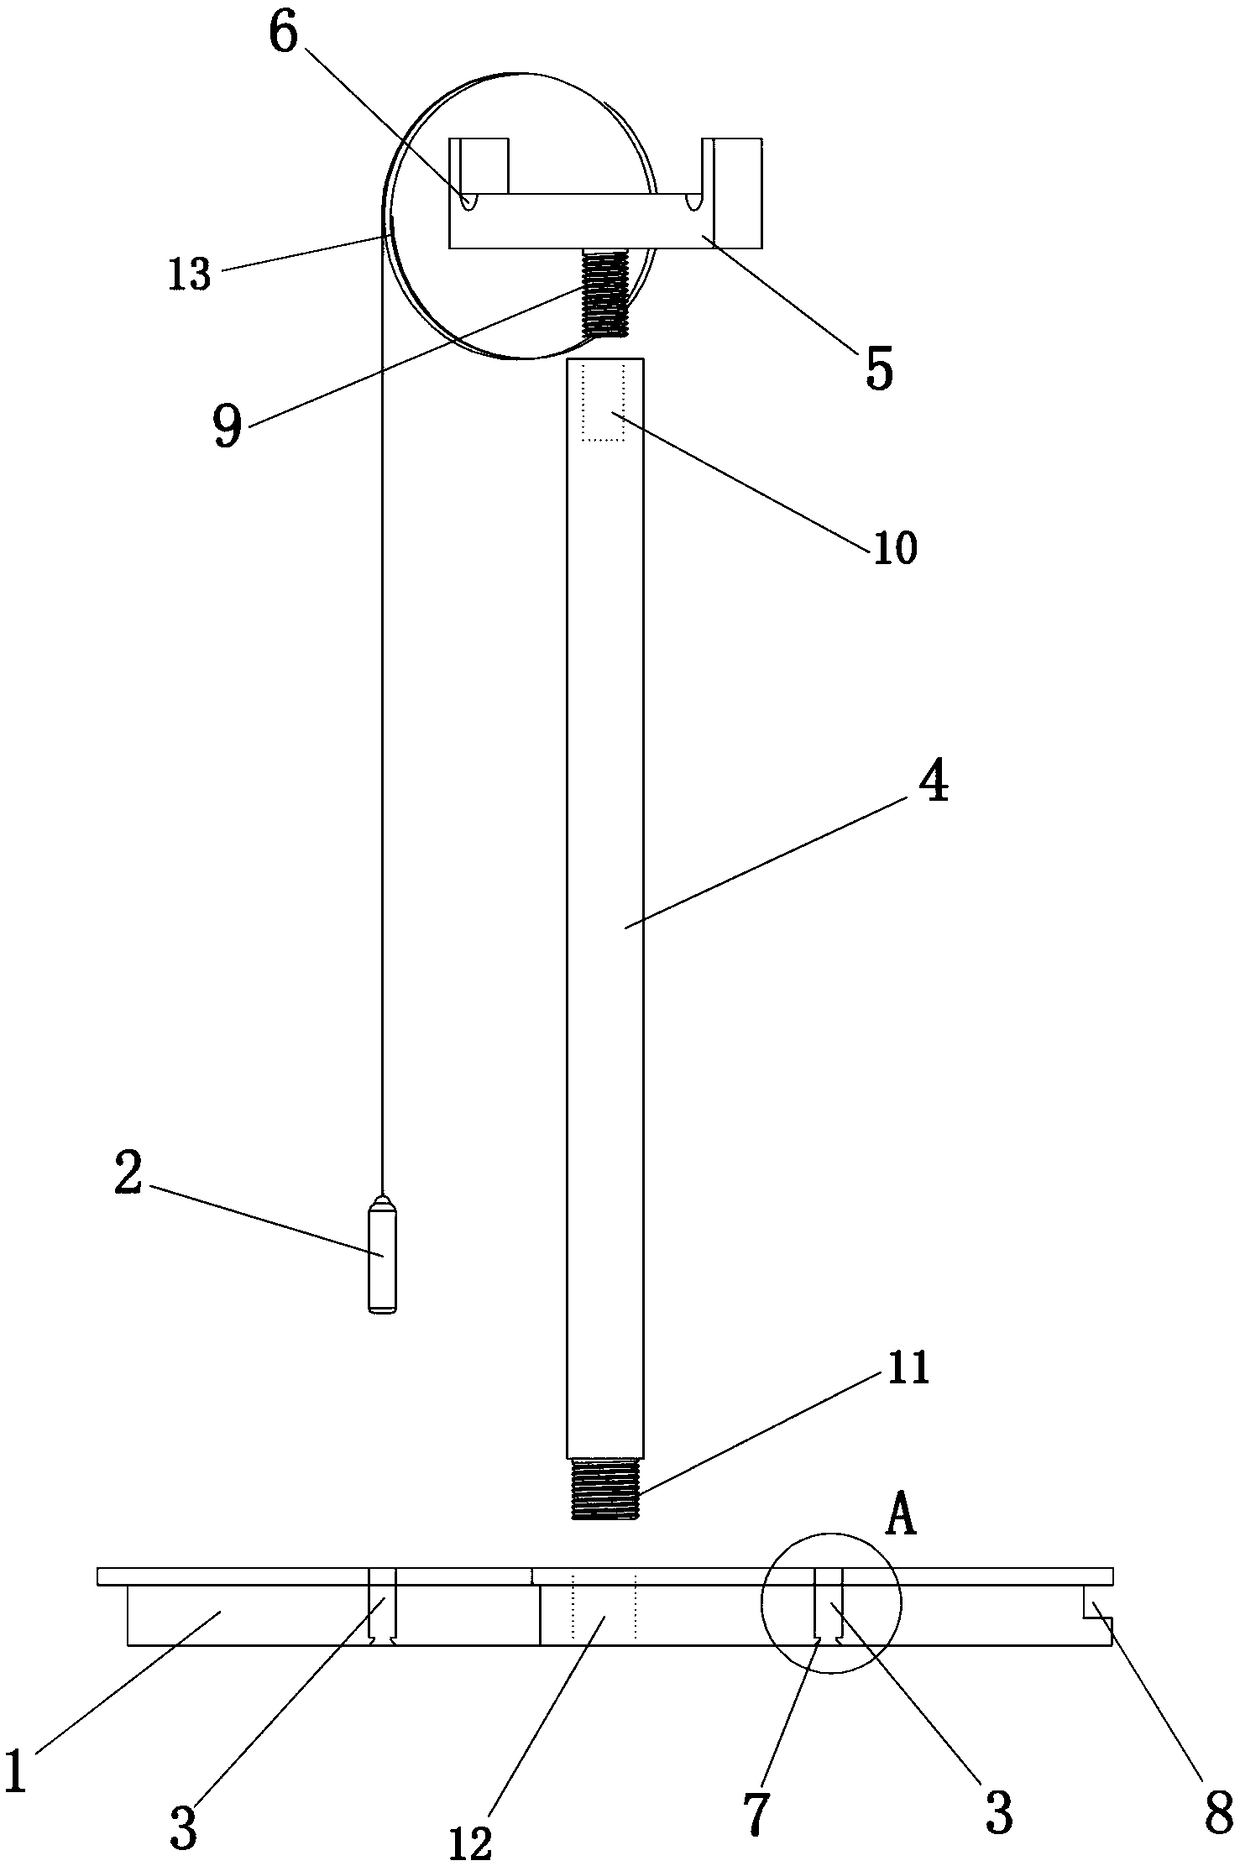 Simple and practical ferrule coating device